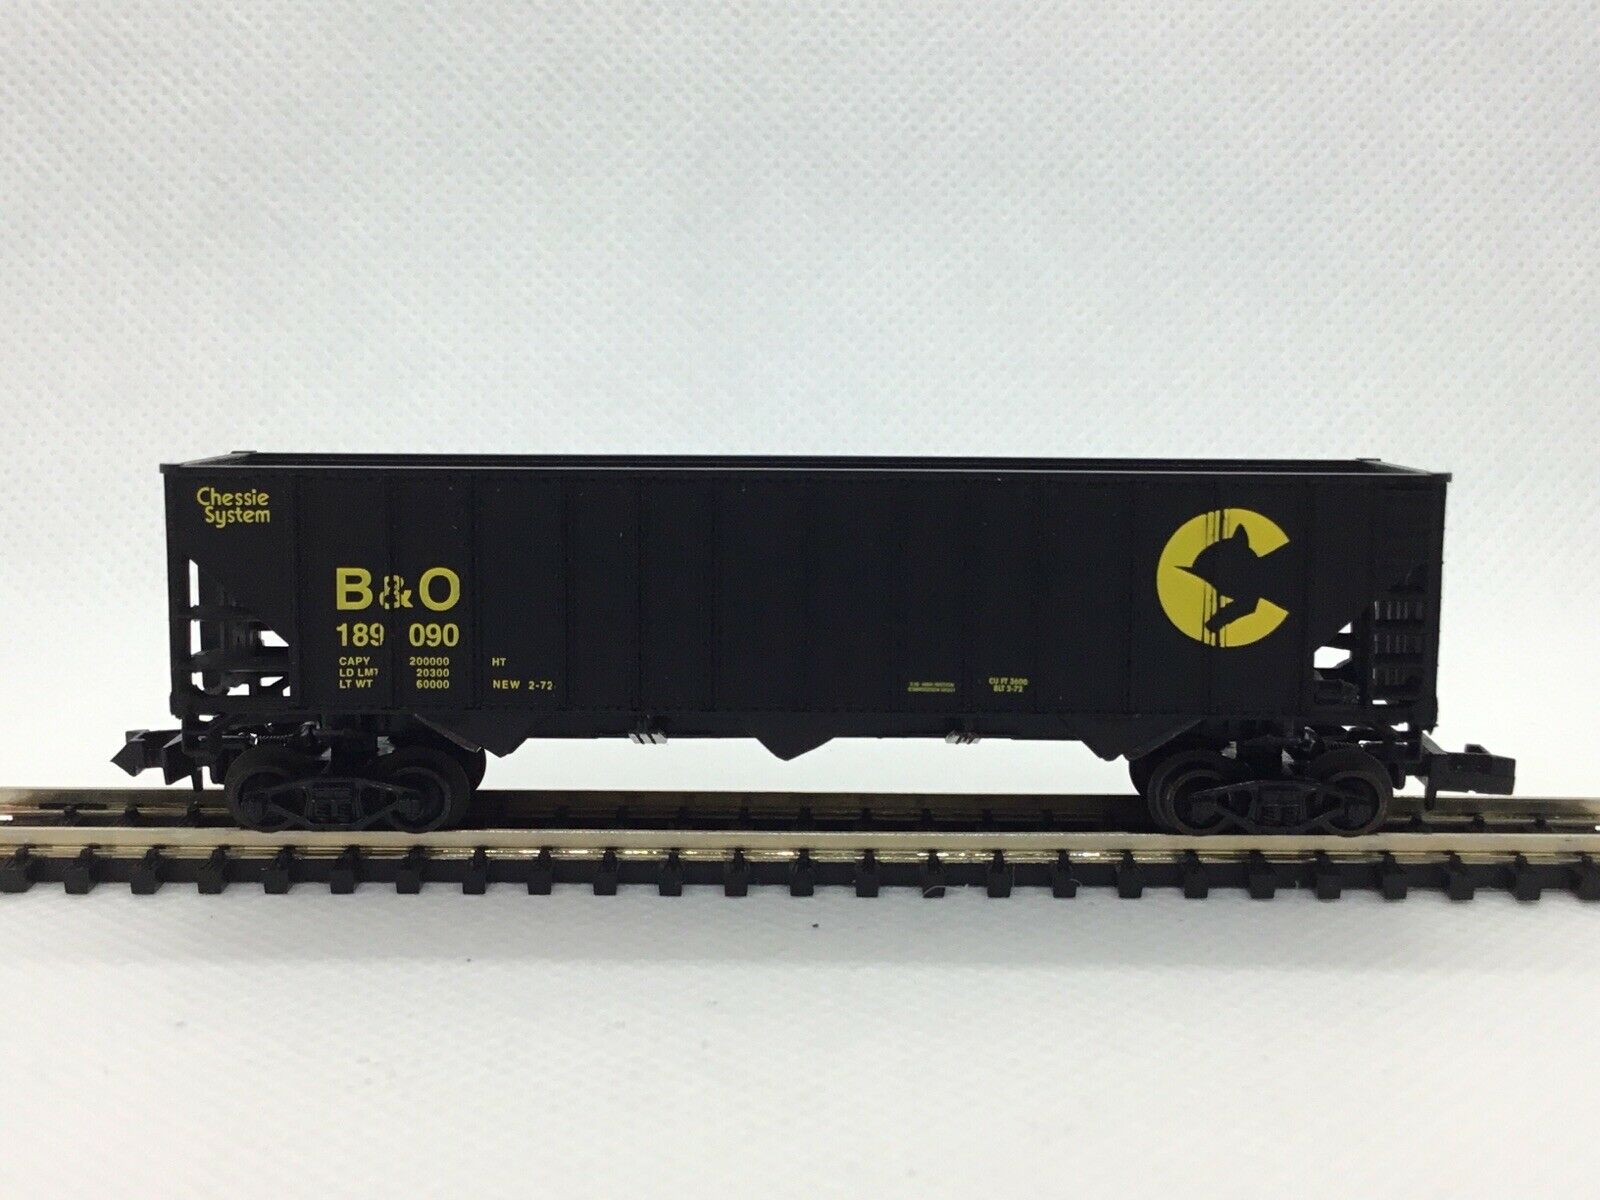 N Scale - Life-Like - 7746 - Open Hopper, 3-Bay, 100 Ton - Chessie System - 189090